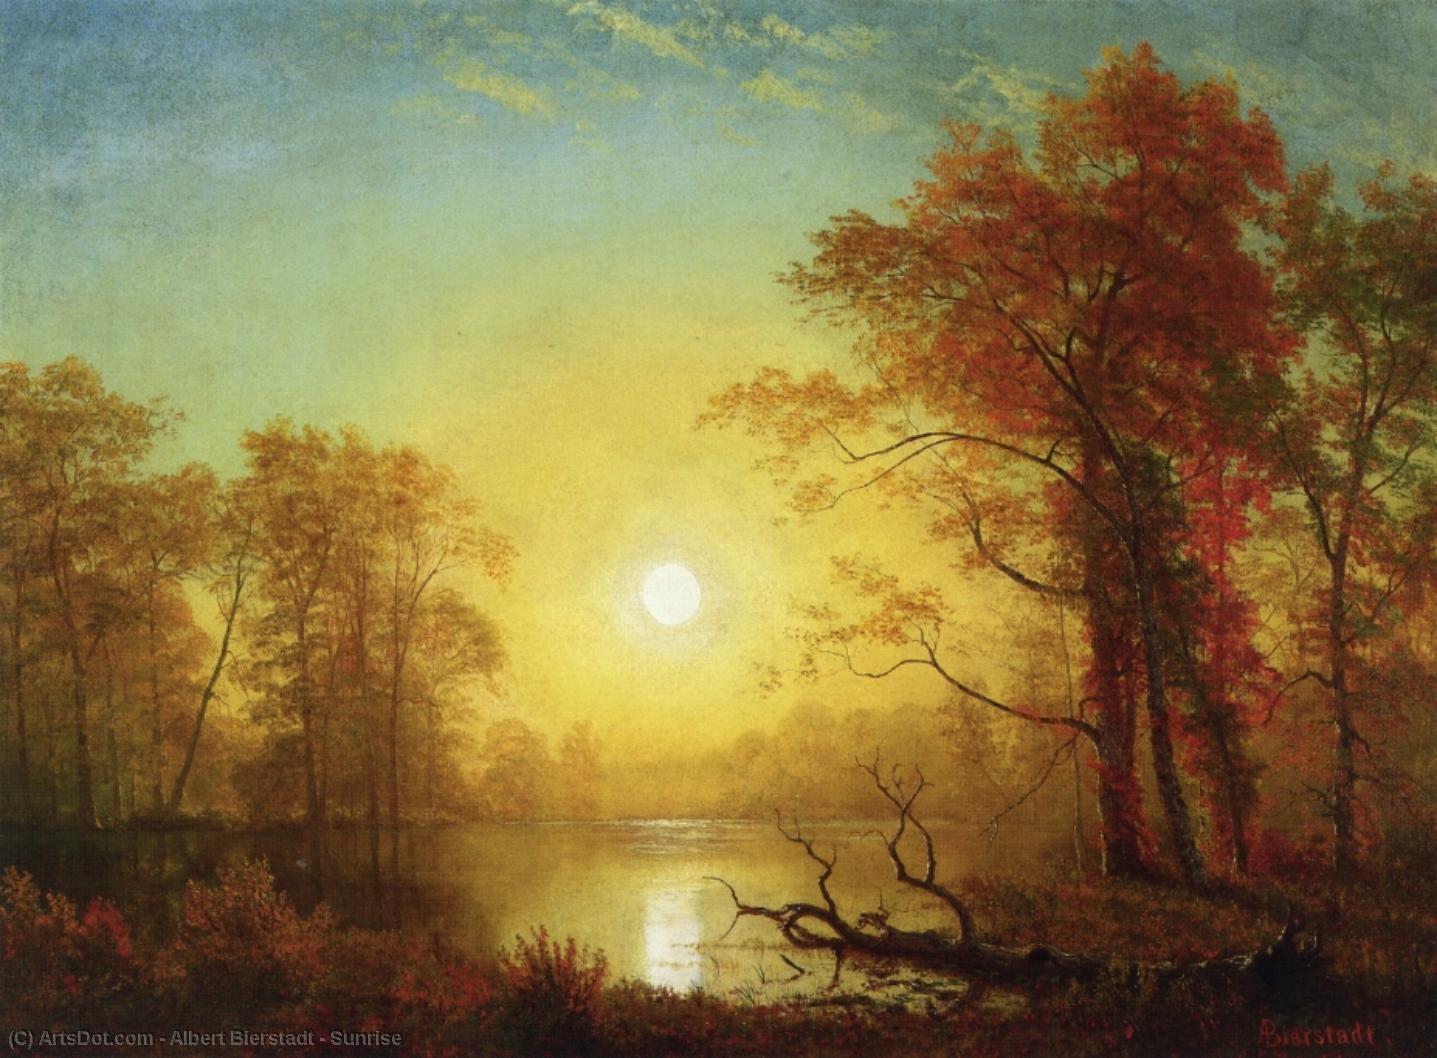 Light can evoke strong feelings as evident in this painting Sunrise by Albert Bierstadt.